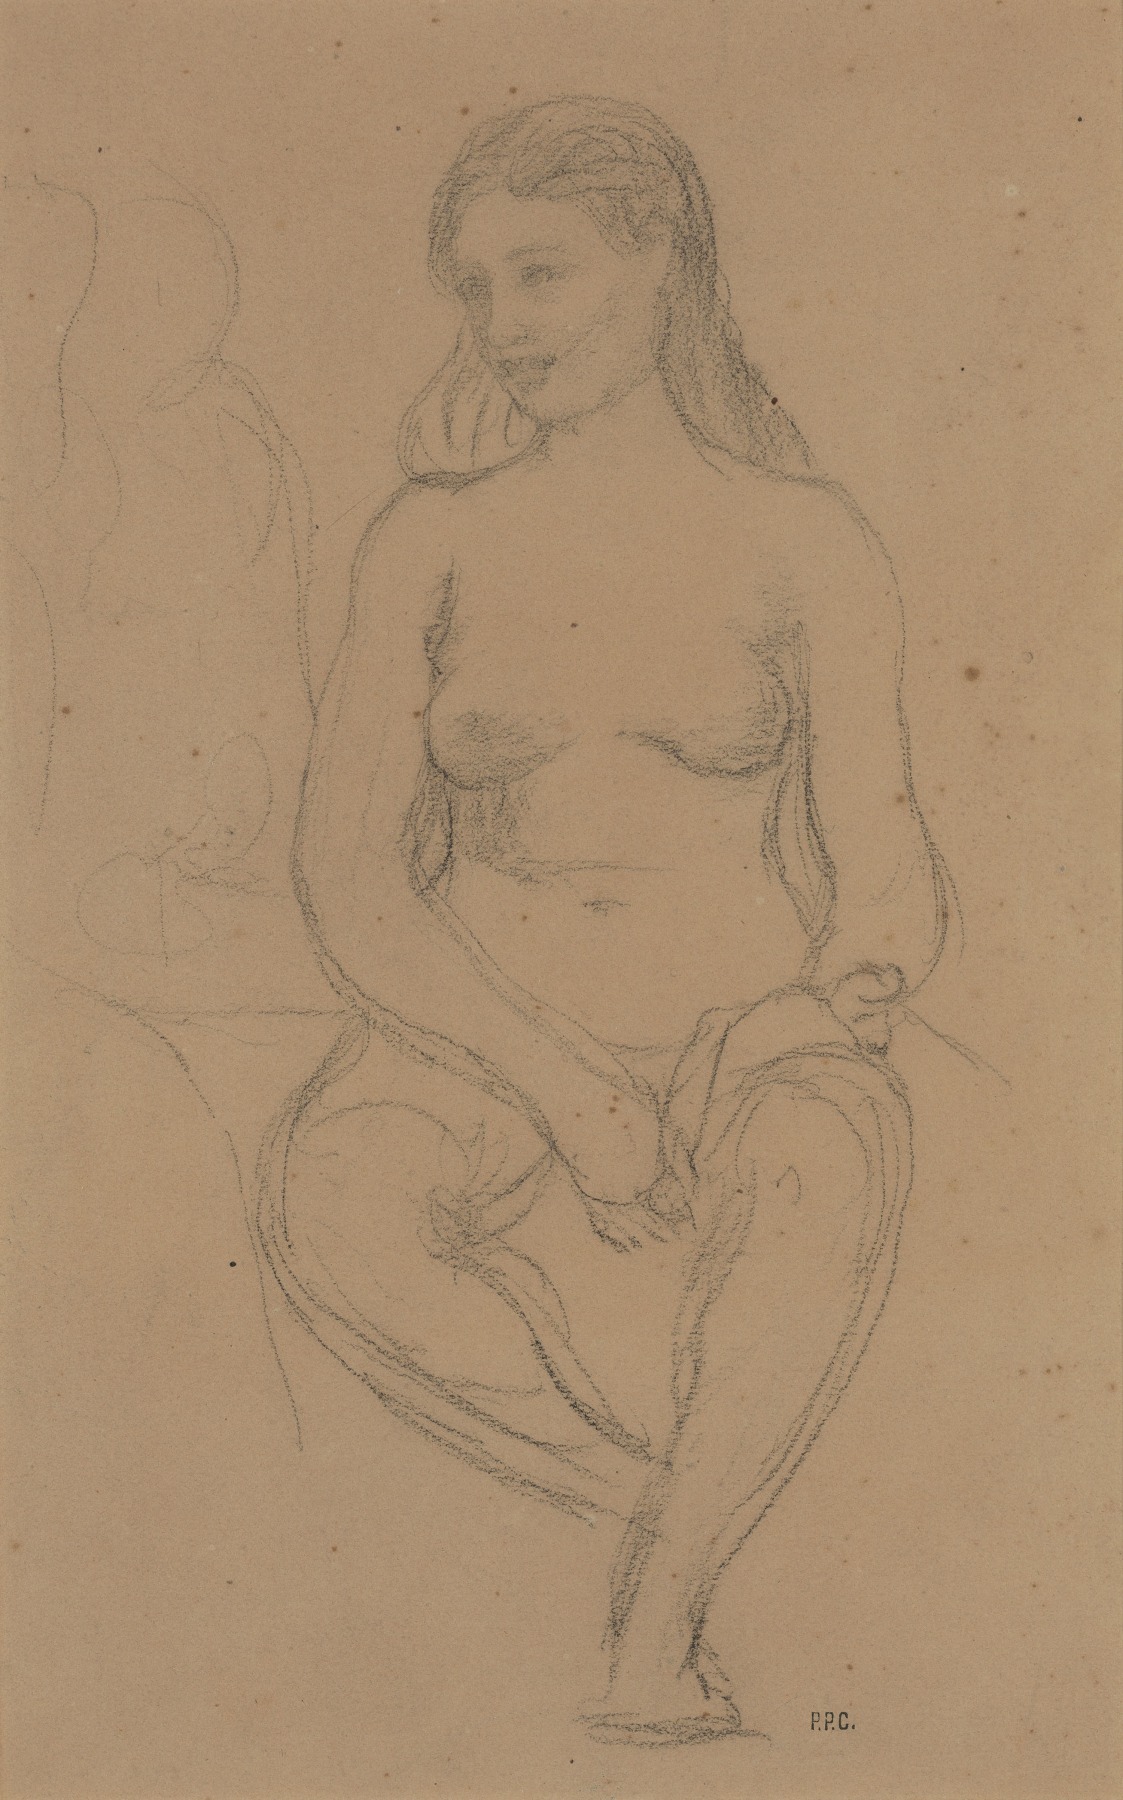 &quot;Nu assis (Seated Nude)&quot;, ca. 1865